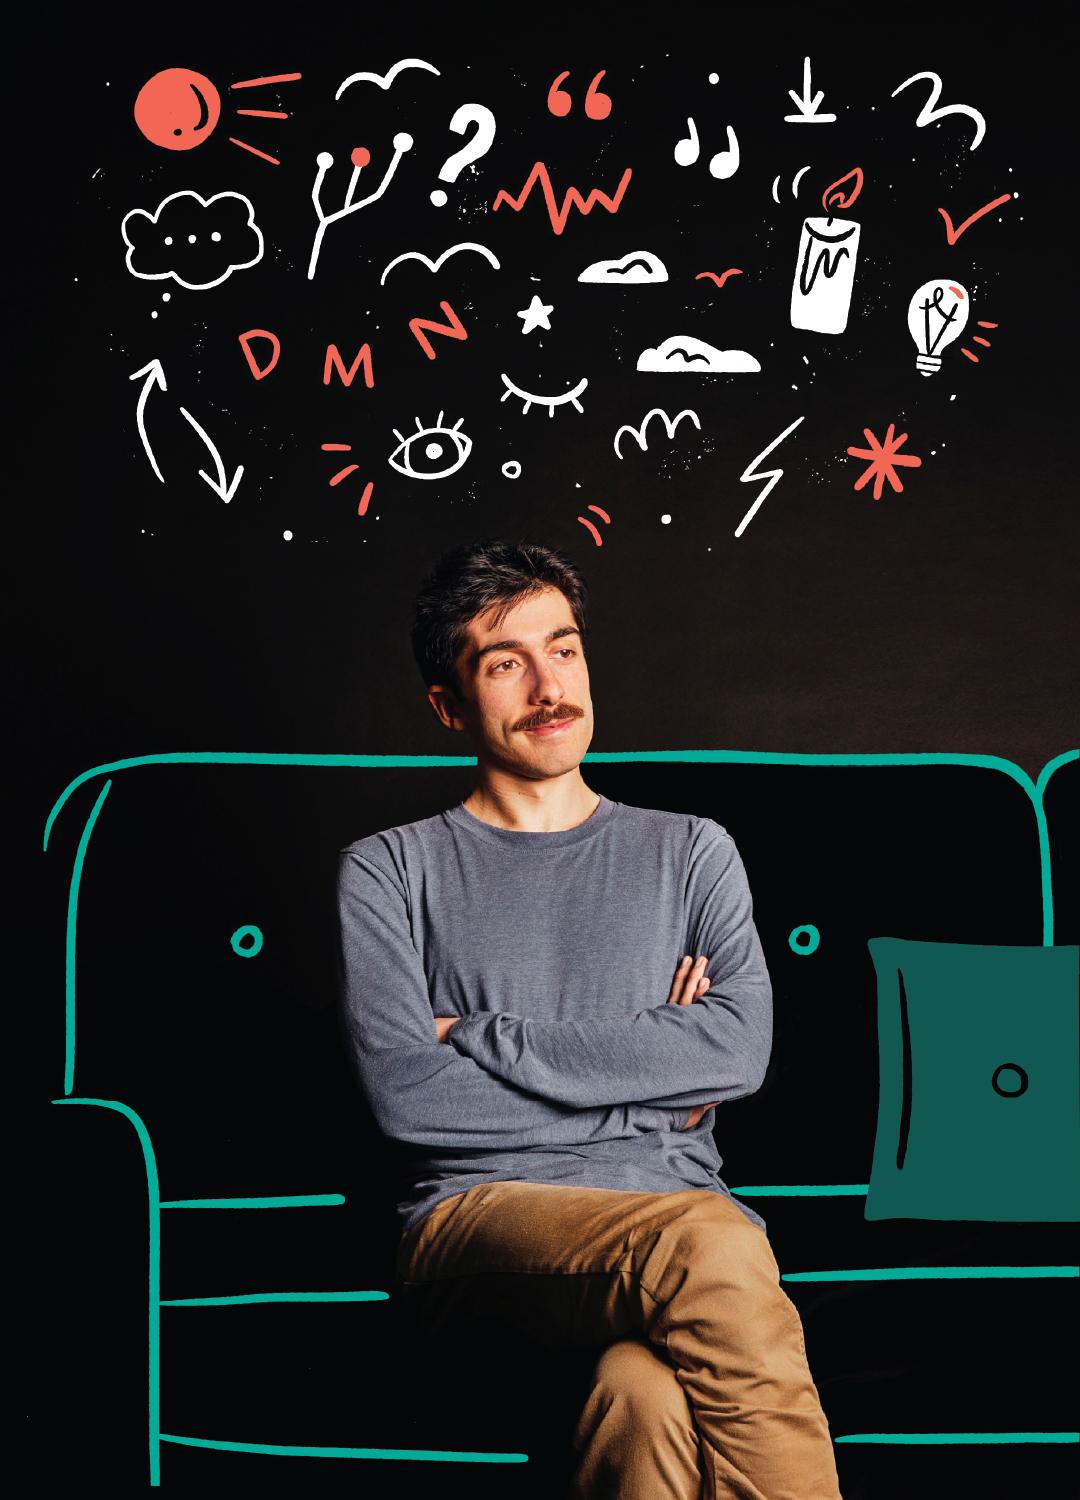 Master's student Andre Zamani sitting down, with daydream-themed illustrations above hie head